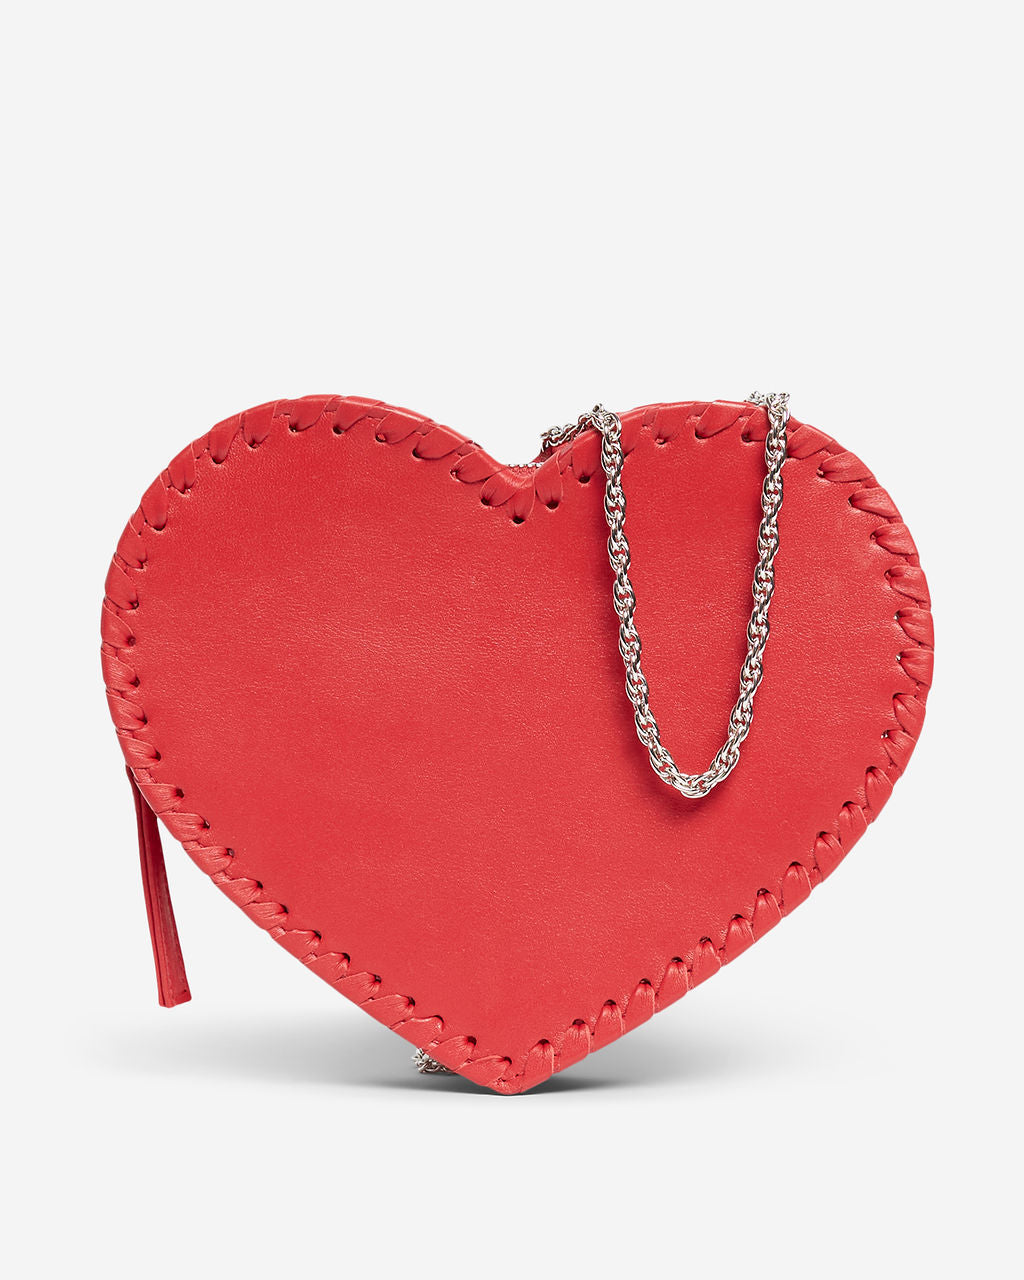 Closer to the Heart Clutch